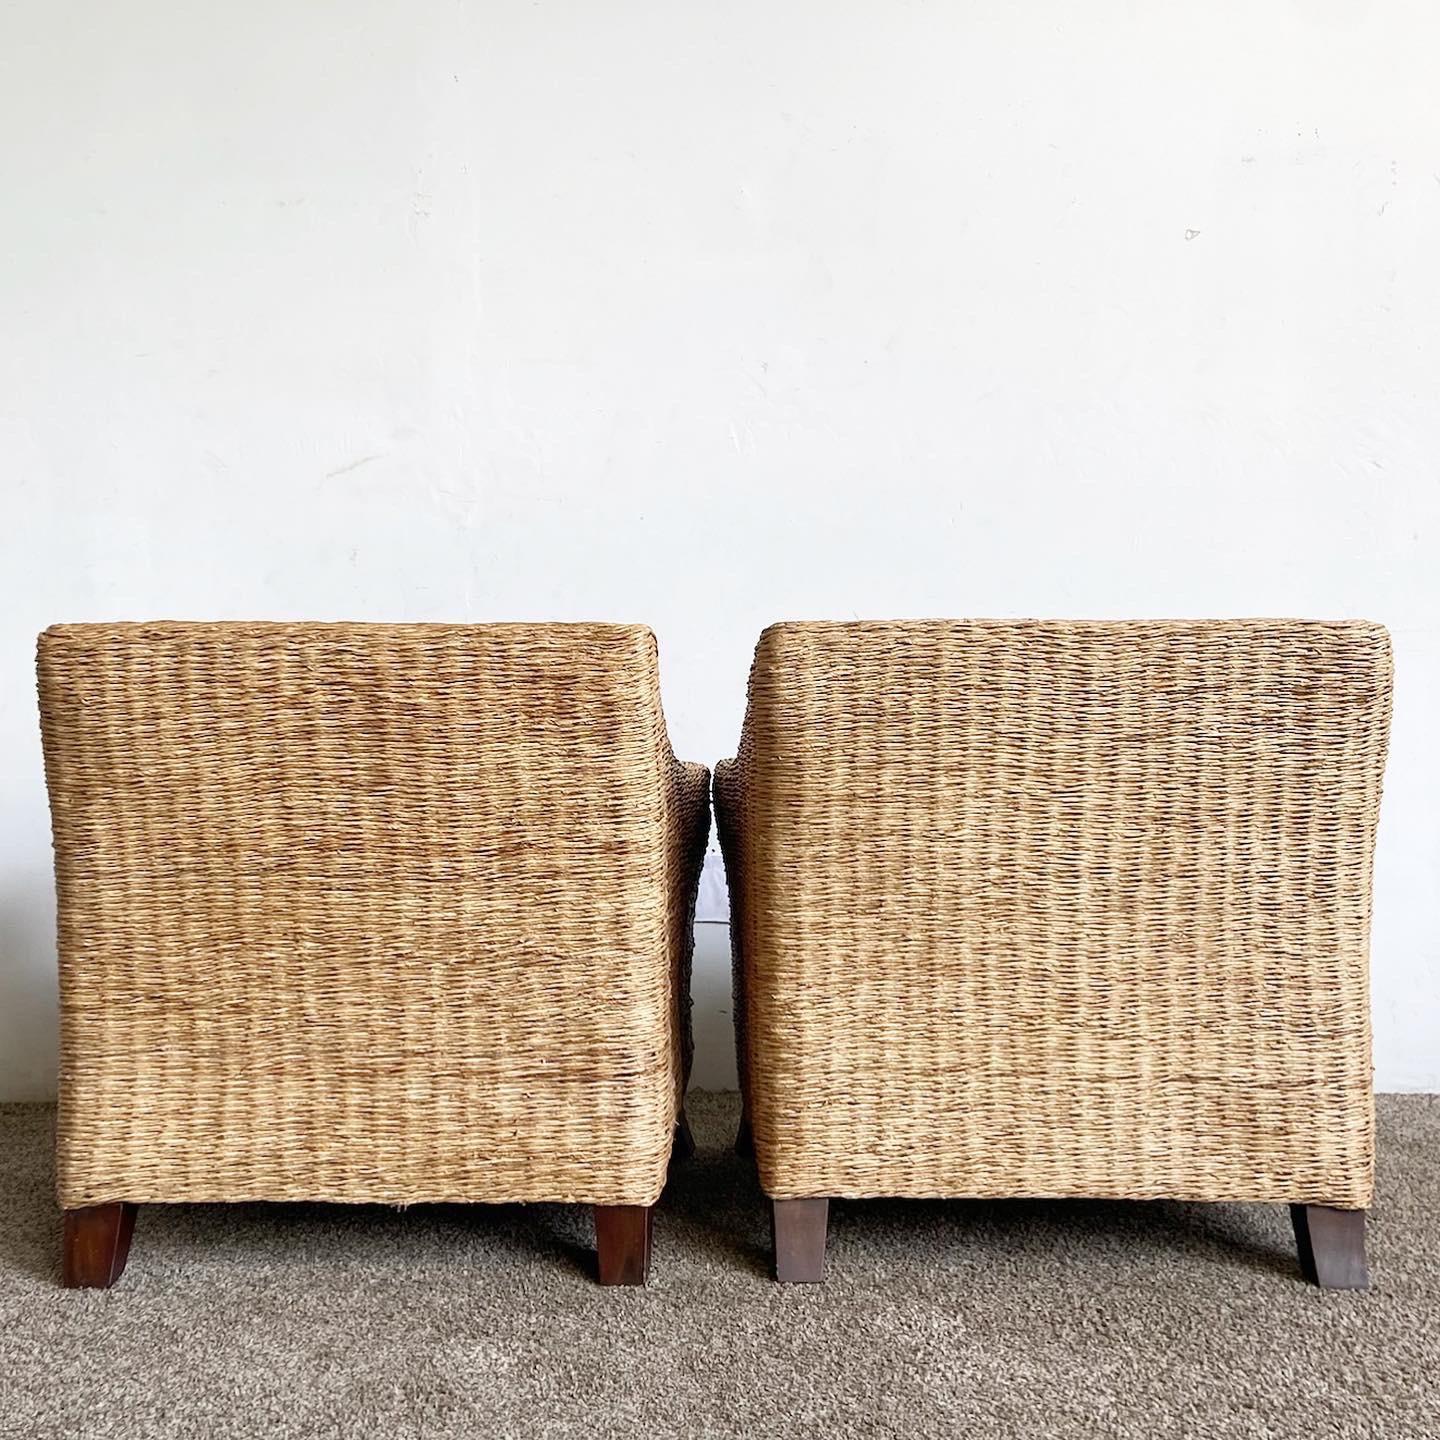 Indonesian Boho Chic Wicker Arm Chairs With Brown Cushions For Sale